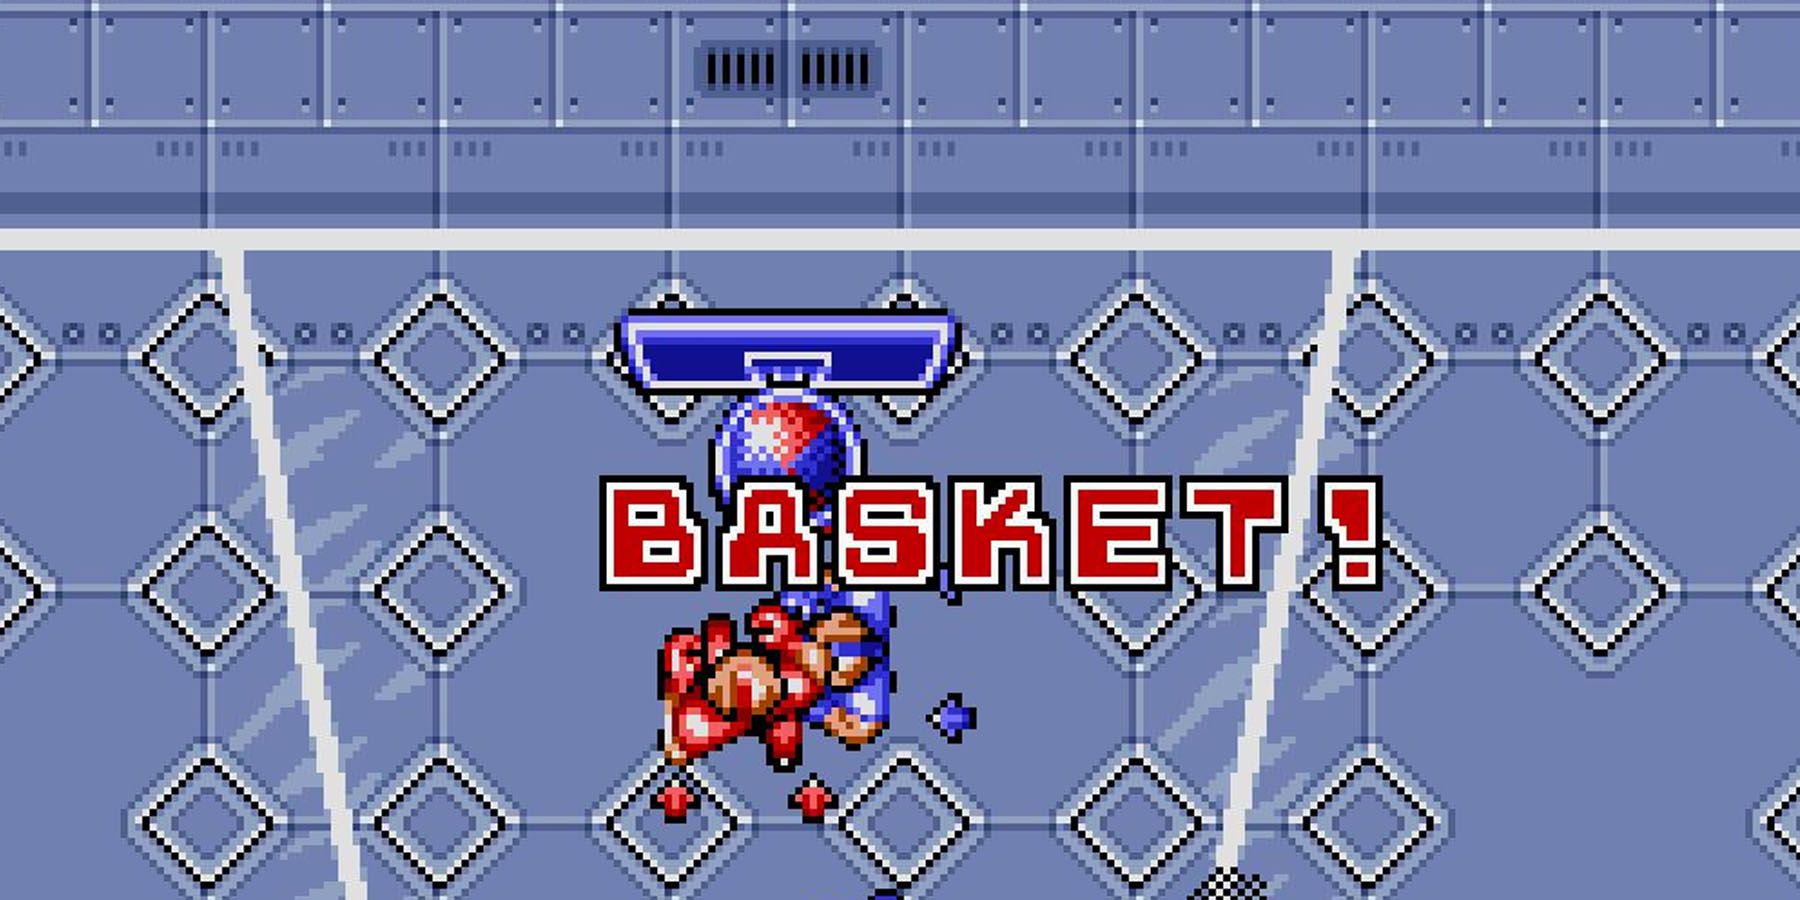 Bill Laimbeer’s Combat Basketball